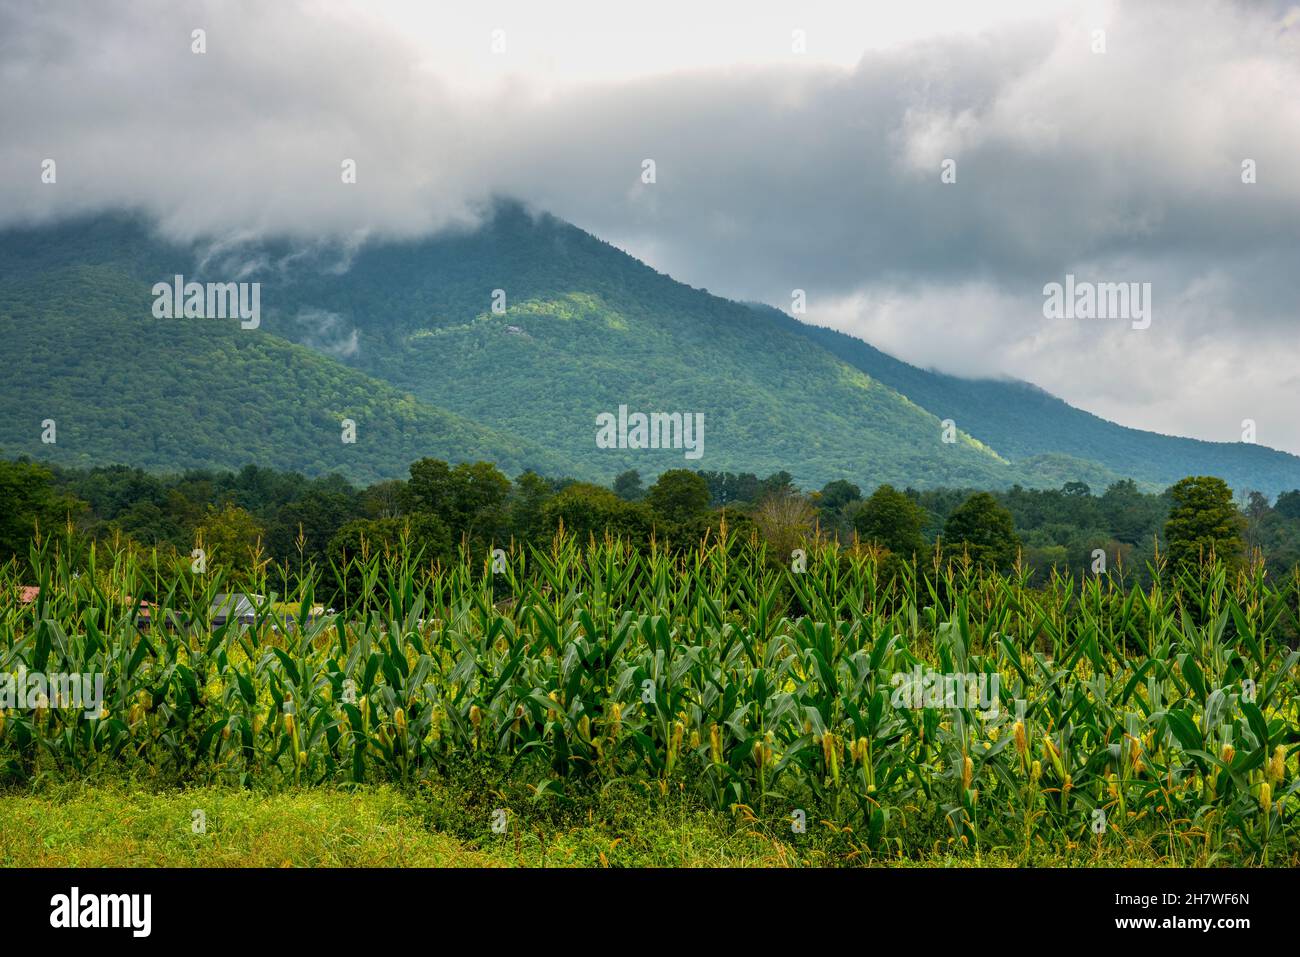 Dramatic scene of rows of corn with the scenic Taconic Mountains in the background in Manchester sourthern Vermont Stock Photo